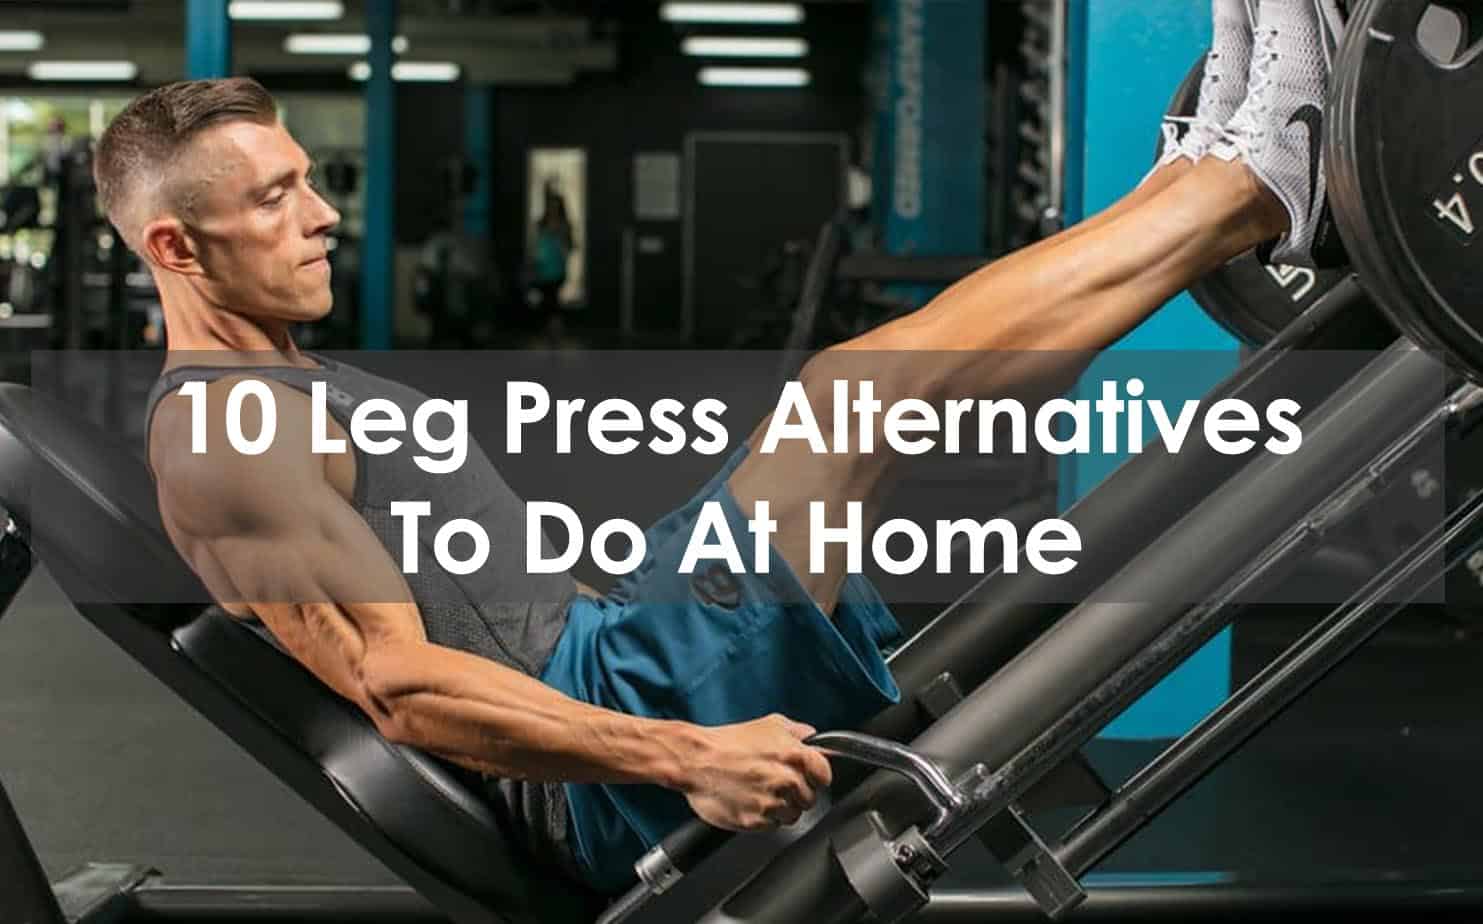 How to Do a Leg Press at Home